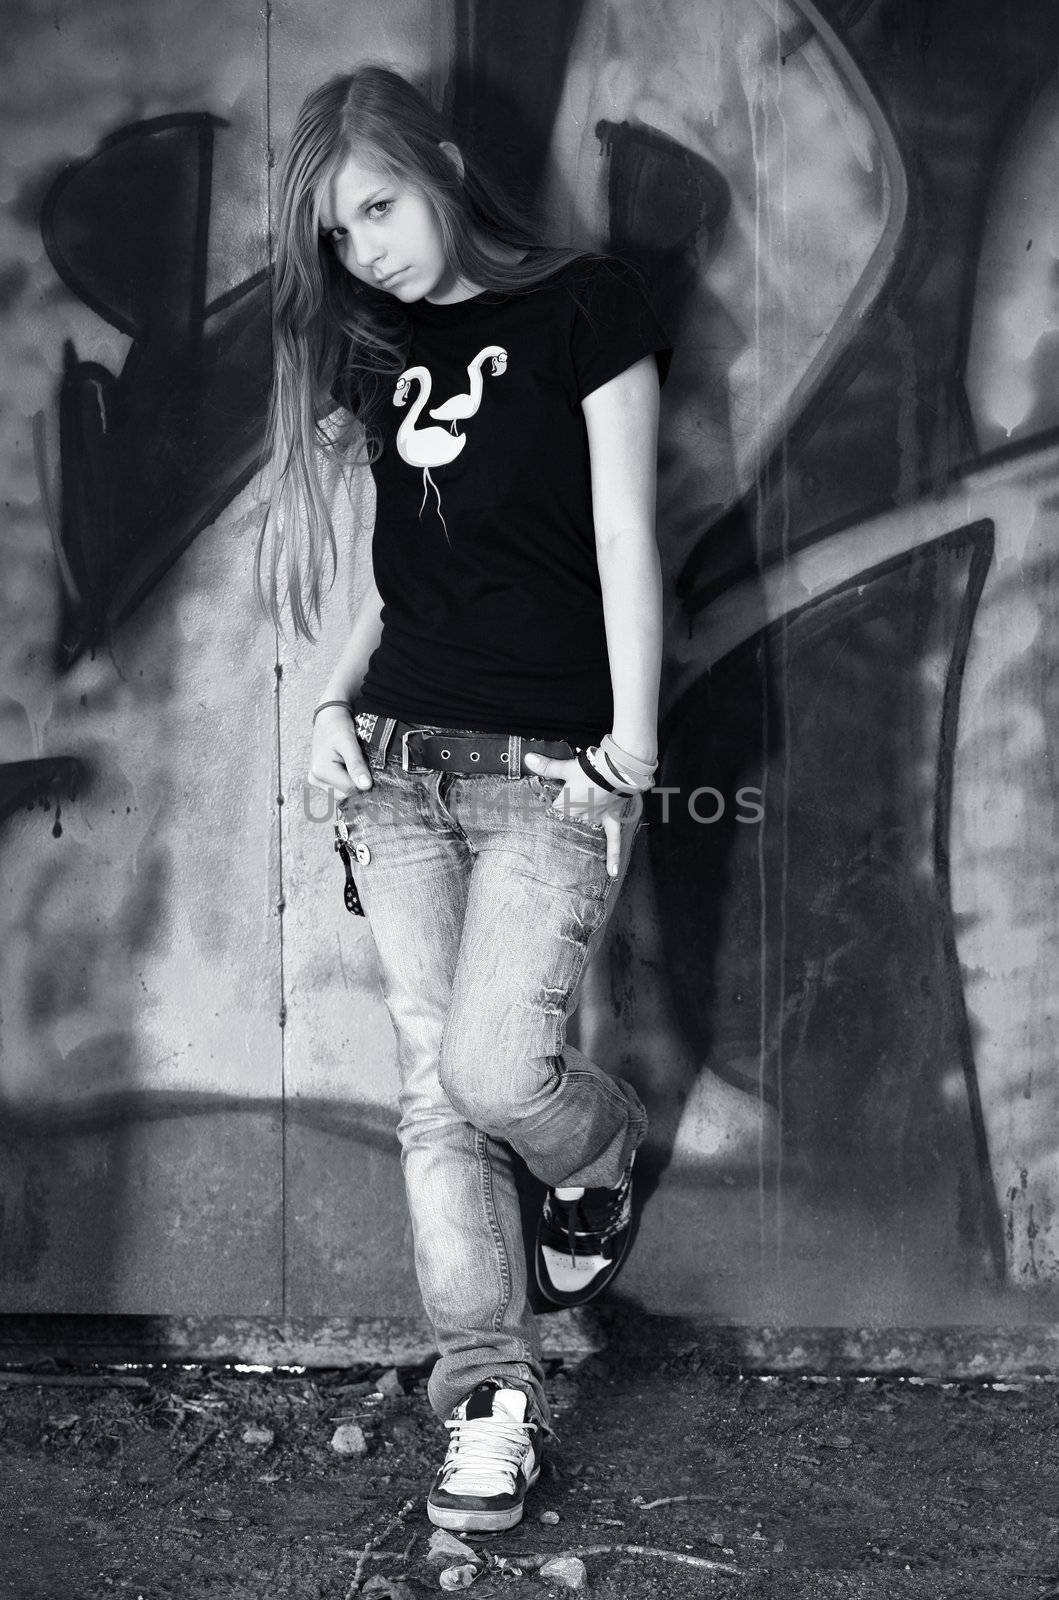 The young girl on a background of a wall with graffiti
